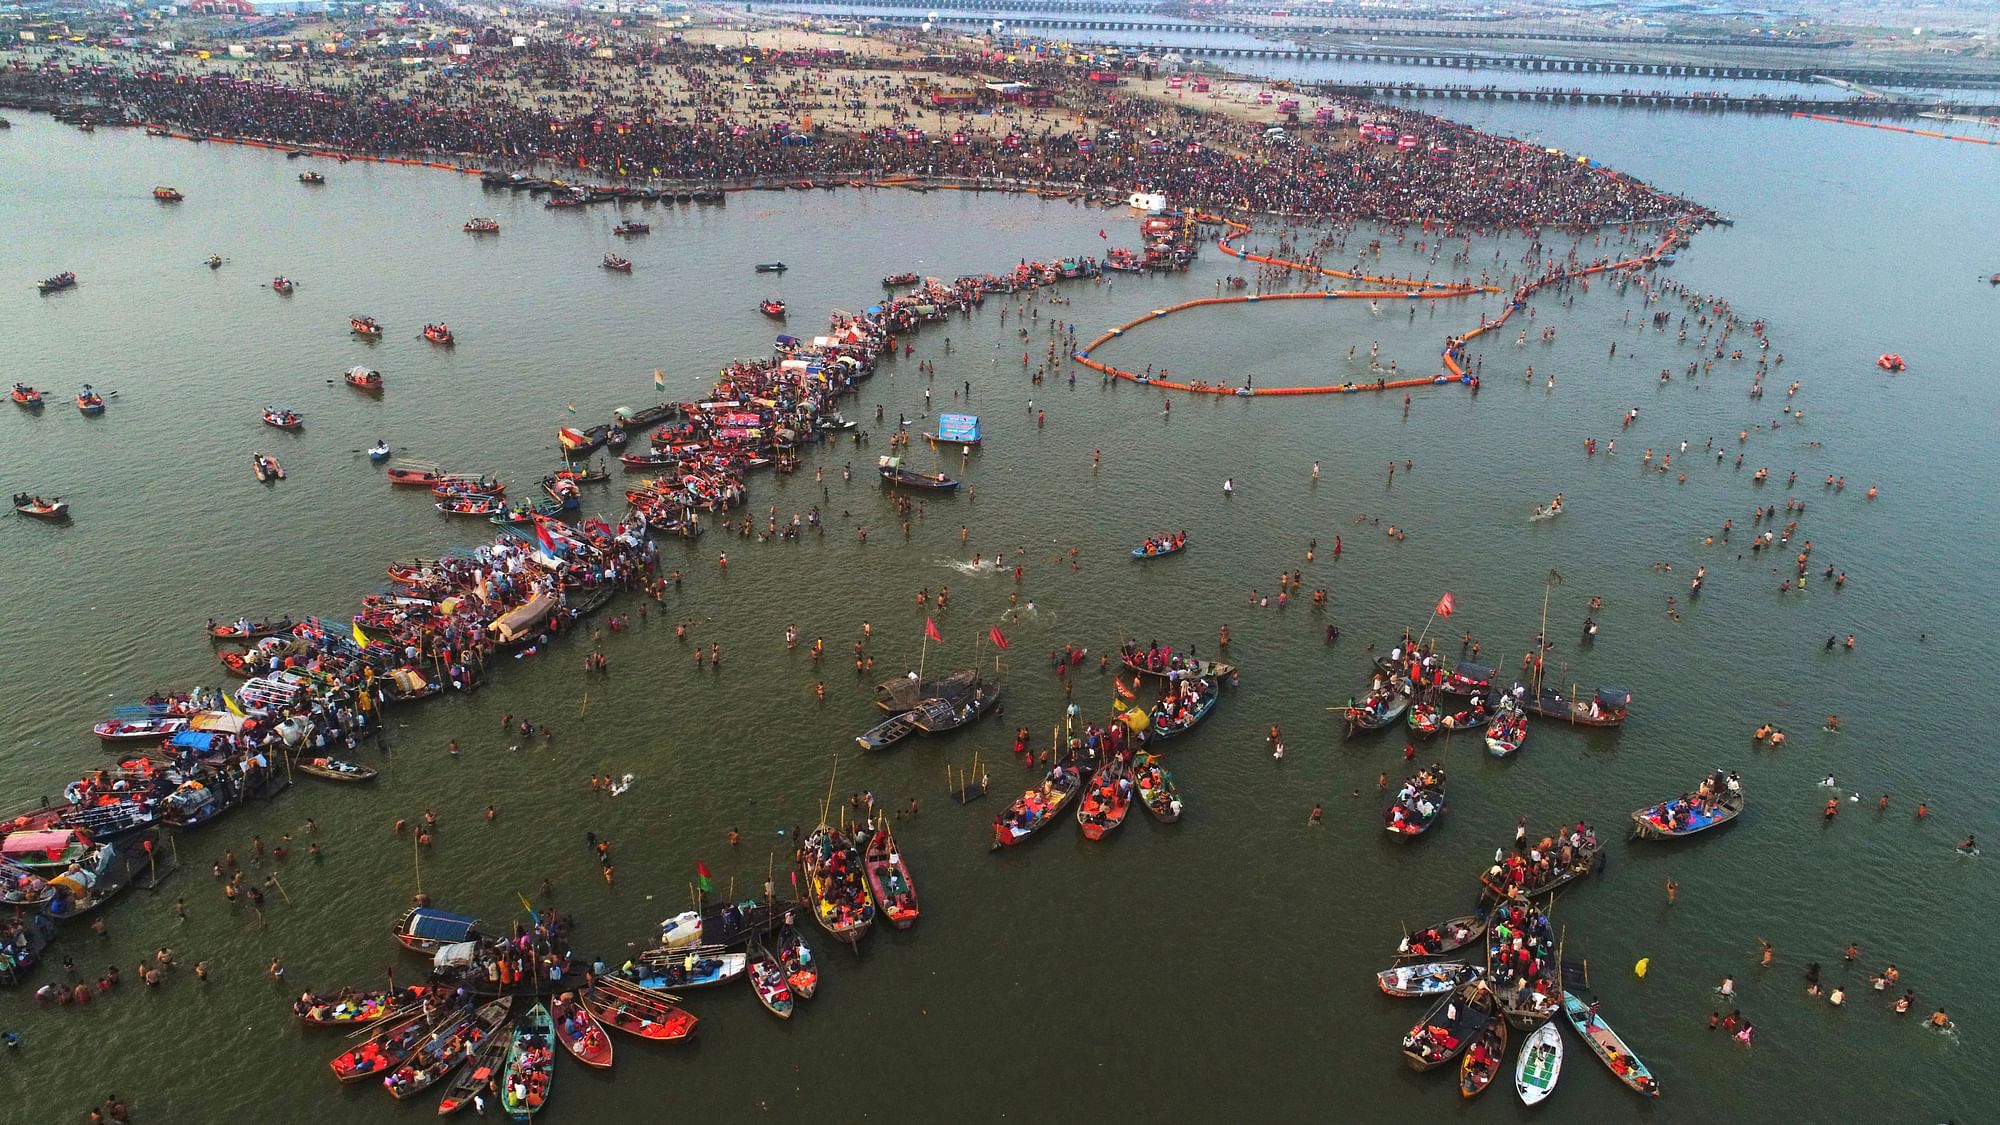 Devotees gather to take a holy dip on the occasion of Maha Shivaratri festival during the ongoing Kumbh Mela in Prayagraj (Allahabad) on Monday, 4 March.&nbsp;